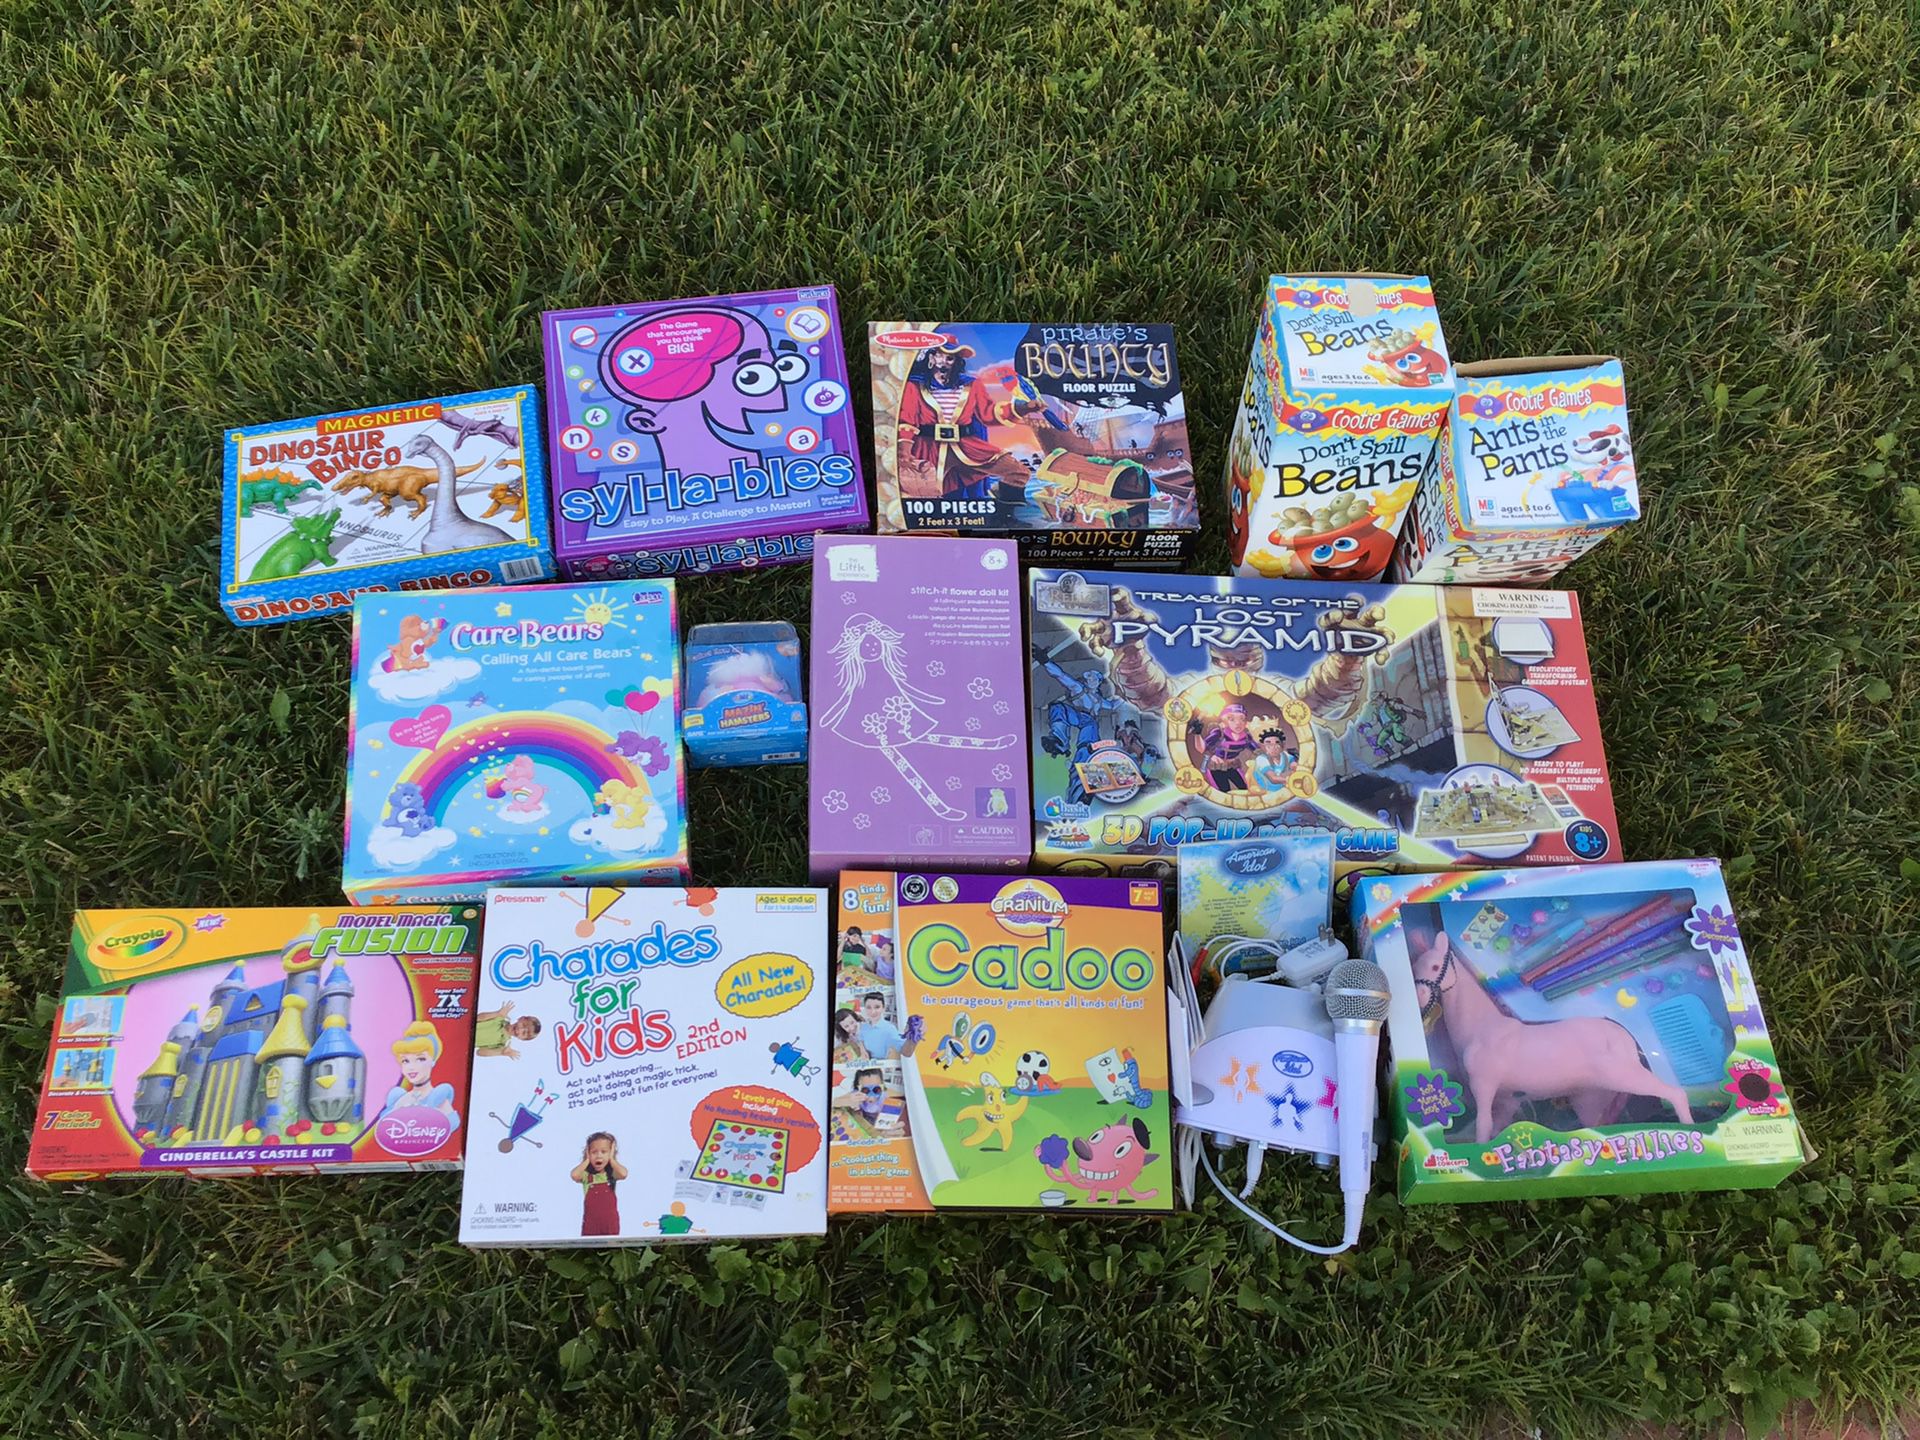 Games, puzzles for kids, charades, Cadoo, play doh, Webkinz, stitch doll